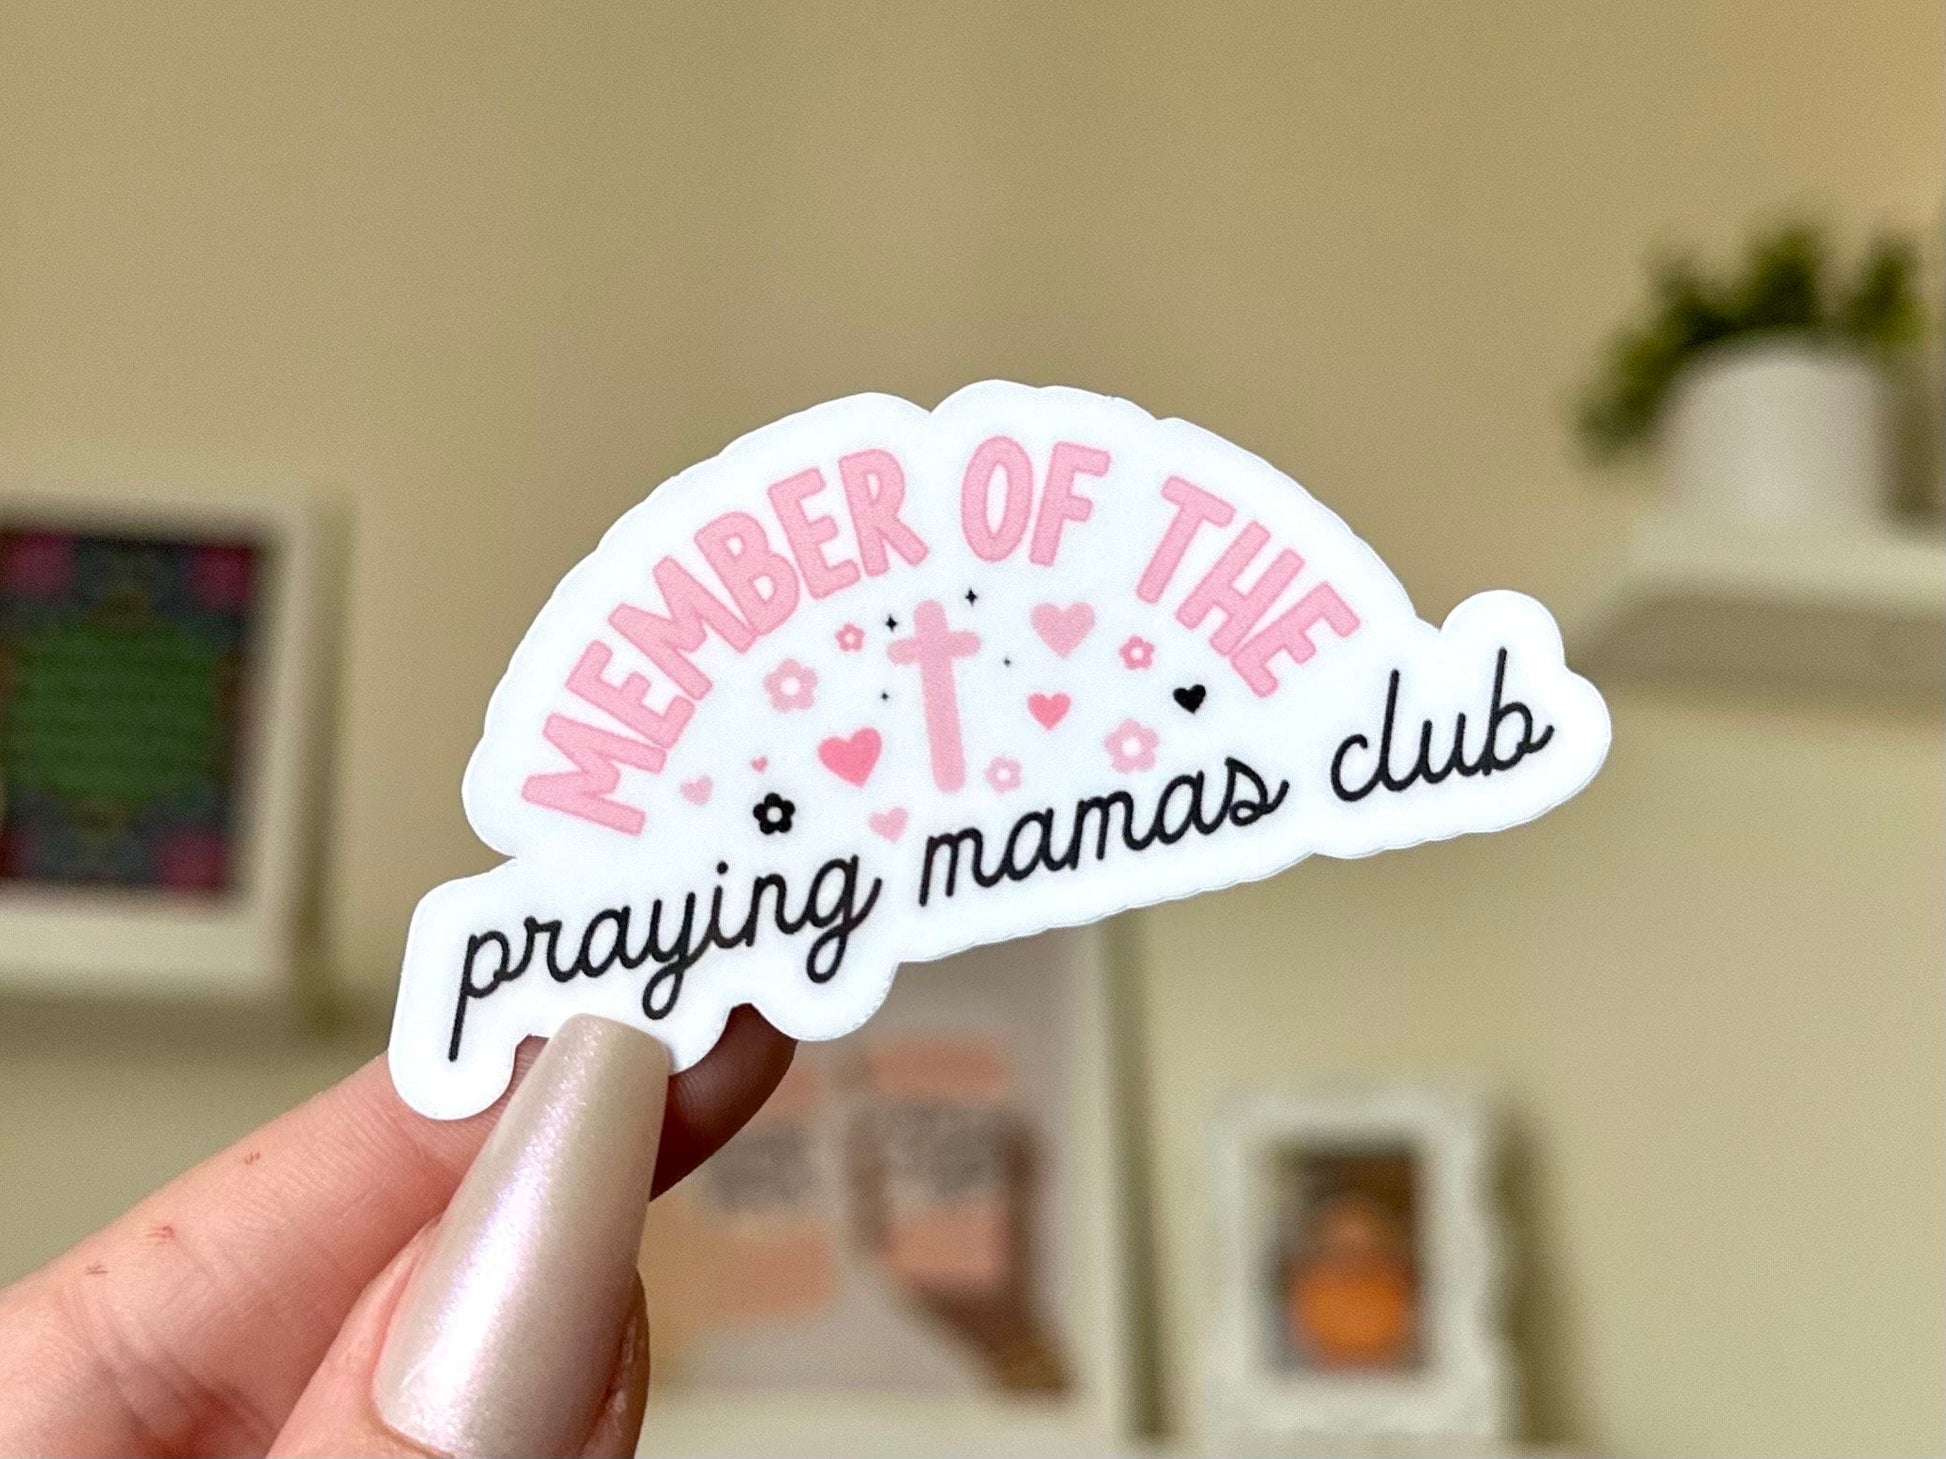 Member of the Praying Mamas Club Waterproof Sticker, Gifts for Mom, Mom Stickers, Mothers Day Gift, Waterbottle Sticker, Tumbler Decal